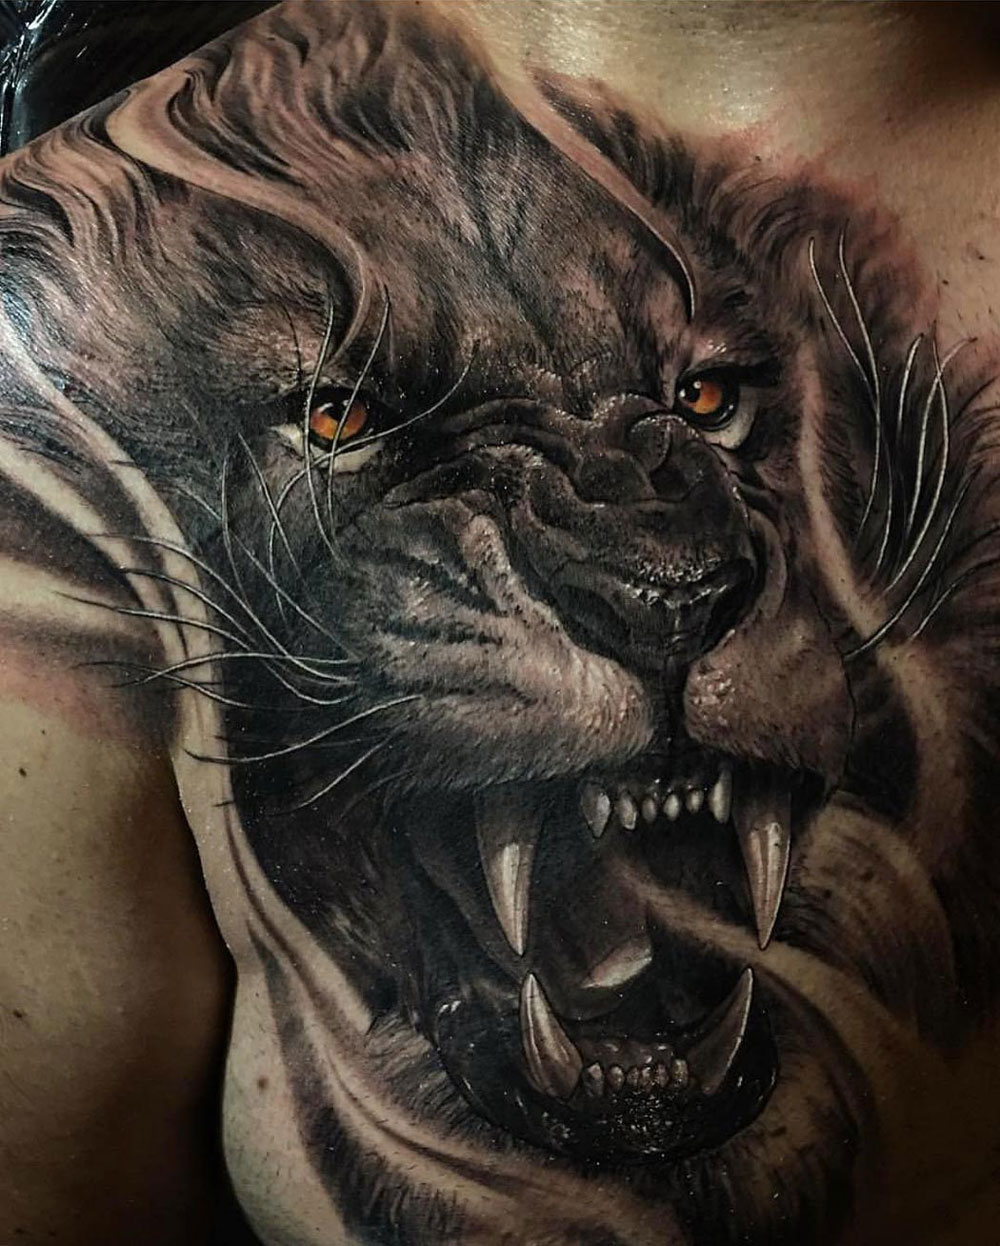 Danny Drinkwater hints at 'dark times' as Chelsea flop shows off incredible  new back tattoo including lion and skulls – The US Sun | The US Sun